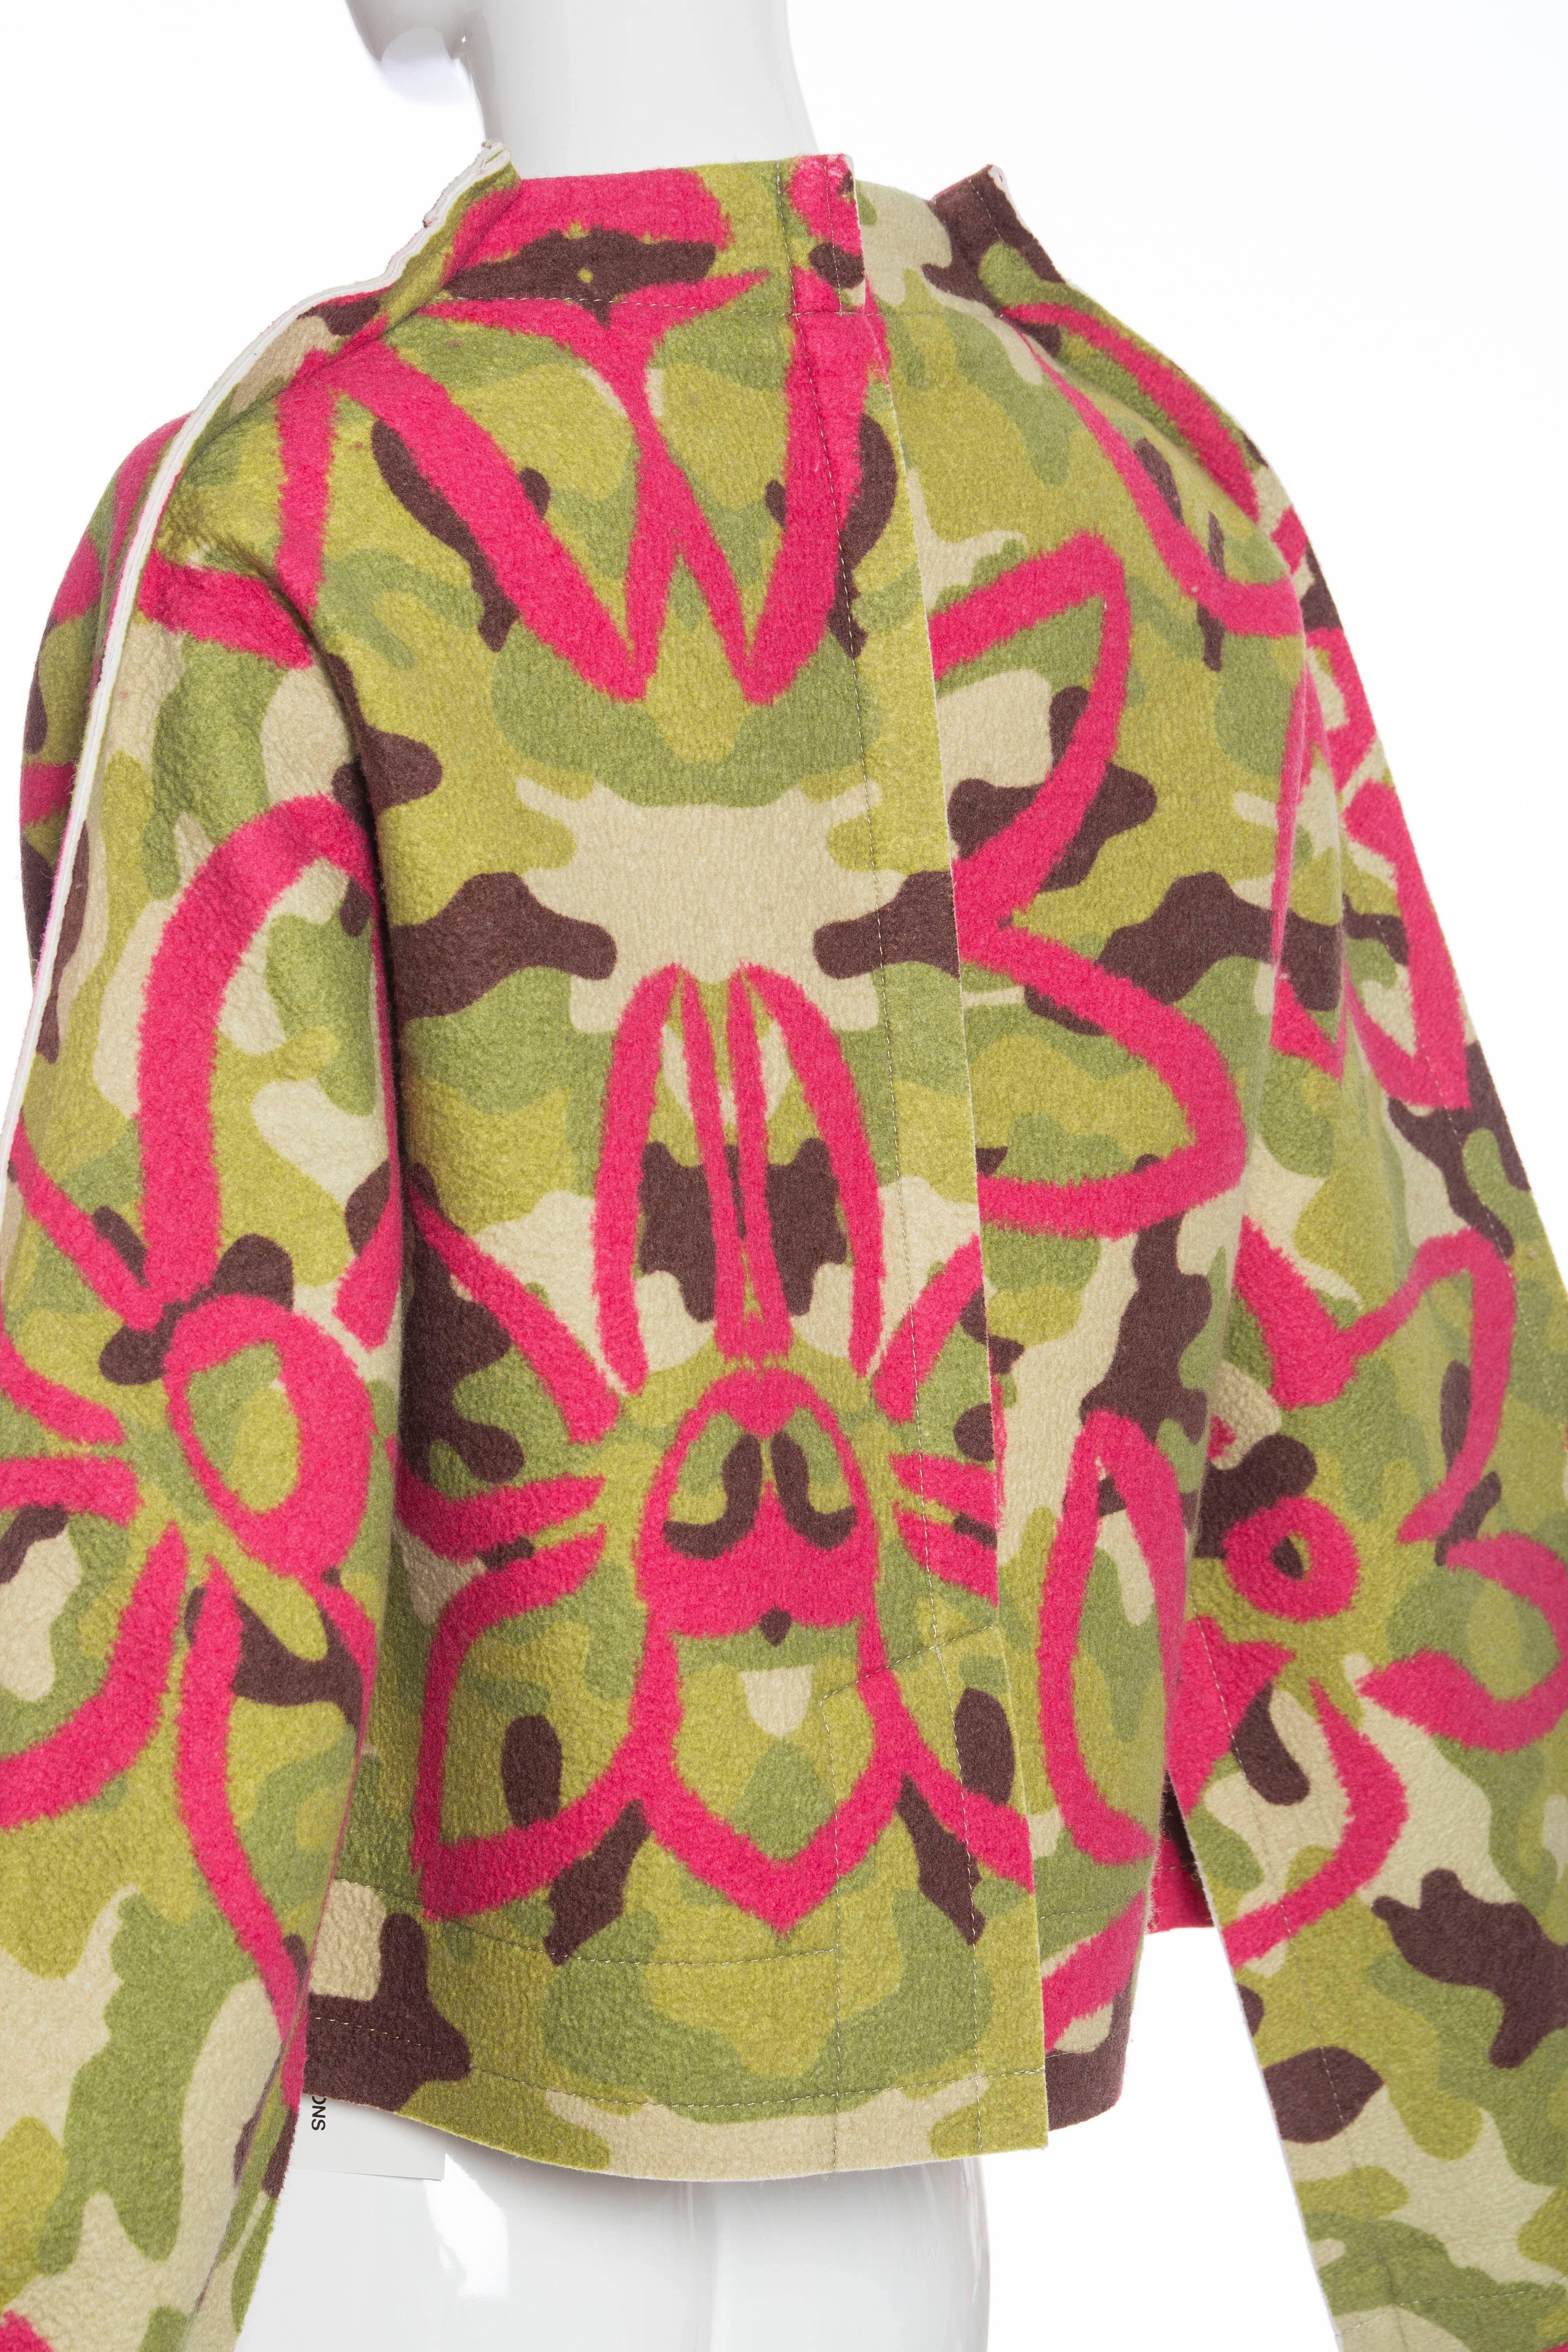 Comme des Garcons Runway 'Flat' or '2D'  Collection Camouflage Jacket, Fall 2012 In Excellent Condition For Sale In Cincinnati, OH